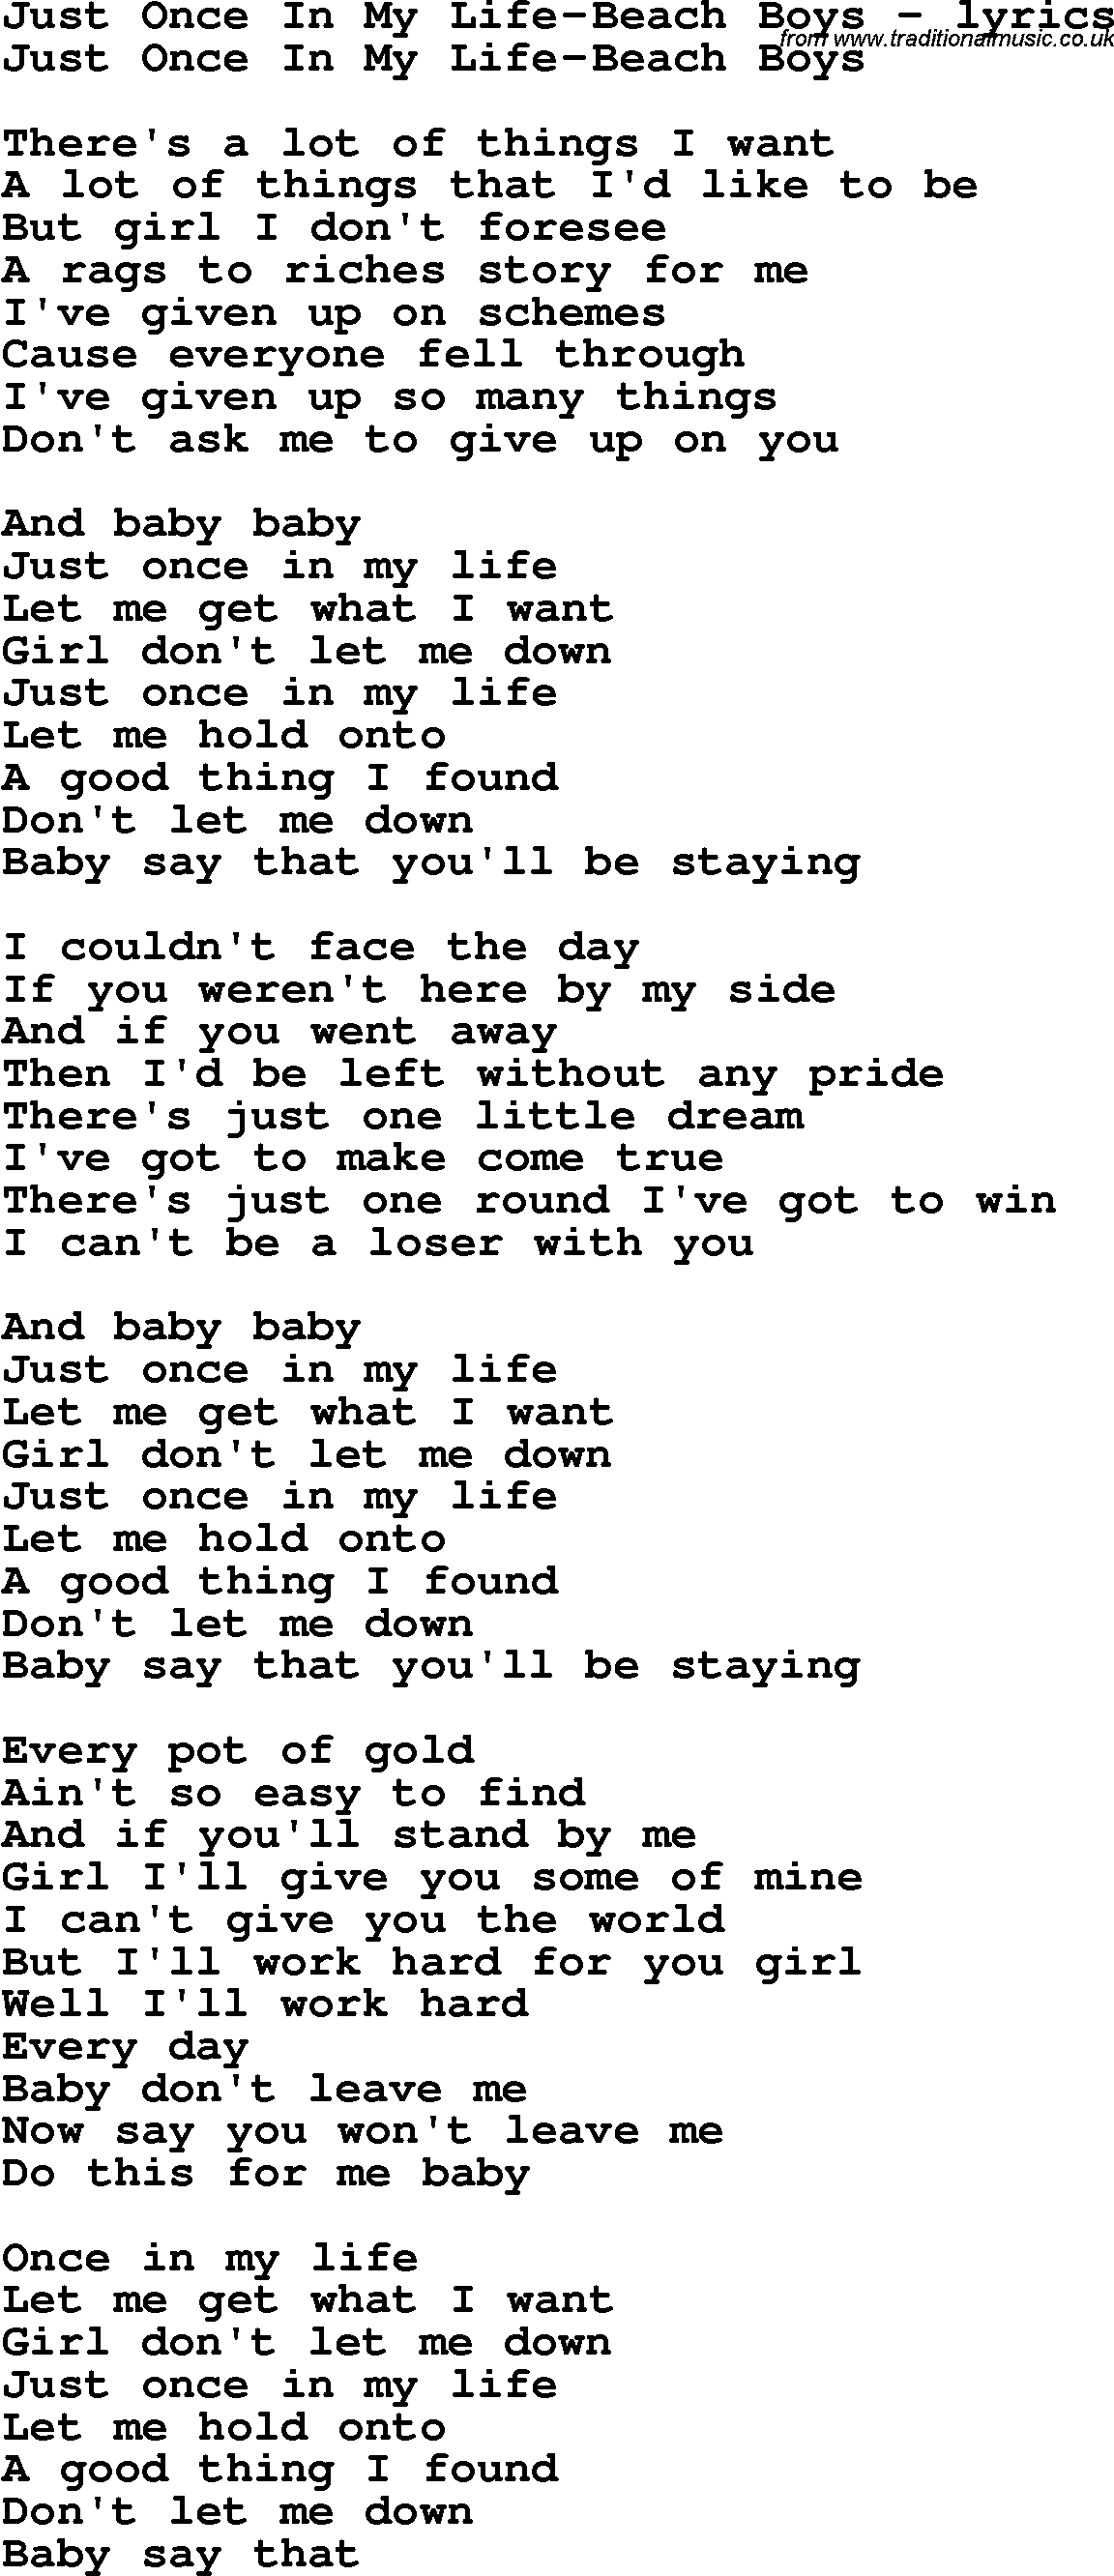 Love Song Lyrics for: Just Once In My Life-Beach Boys